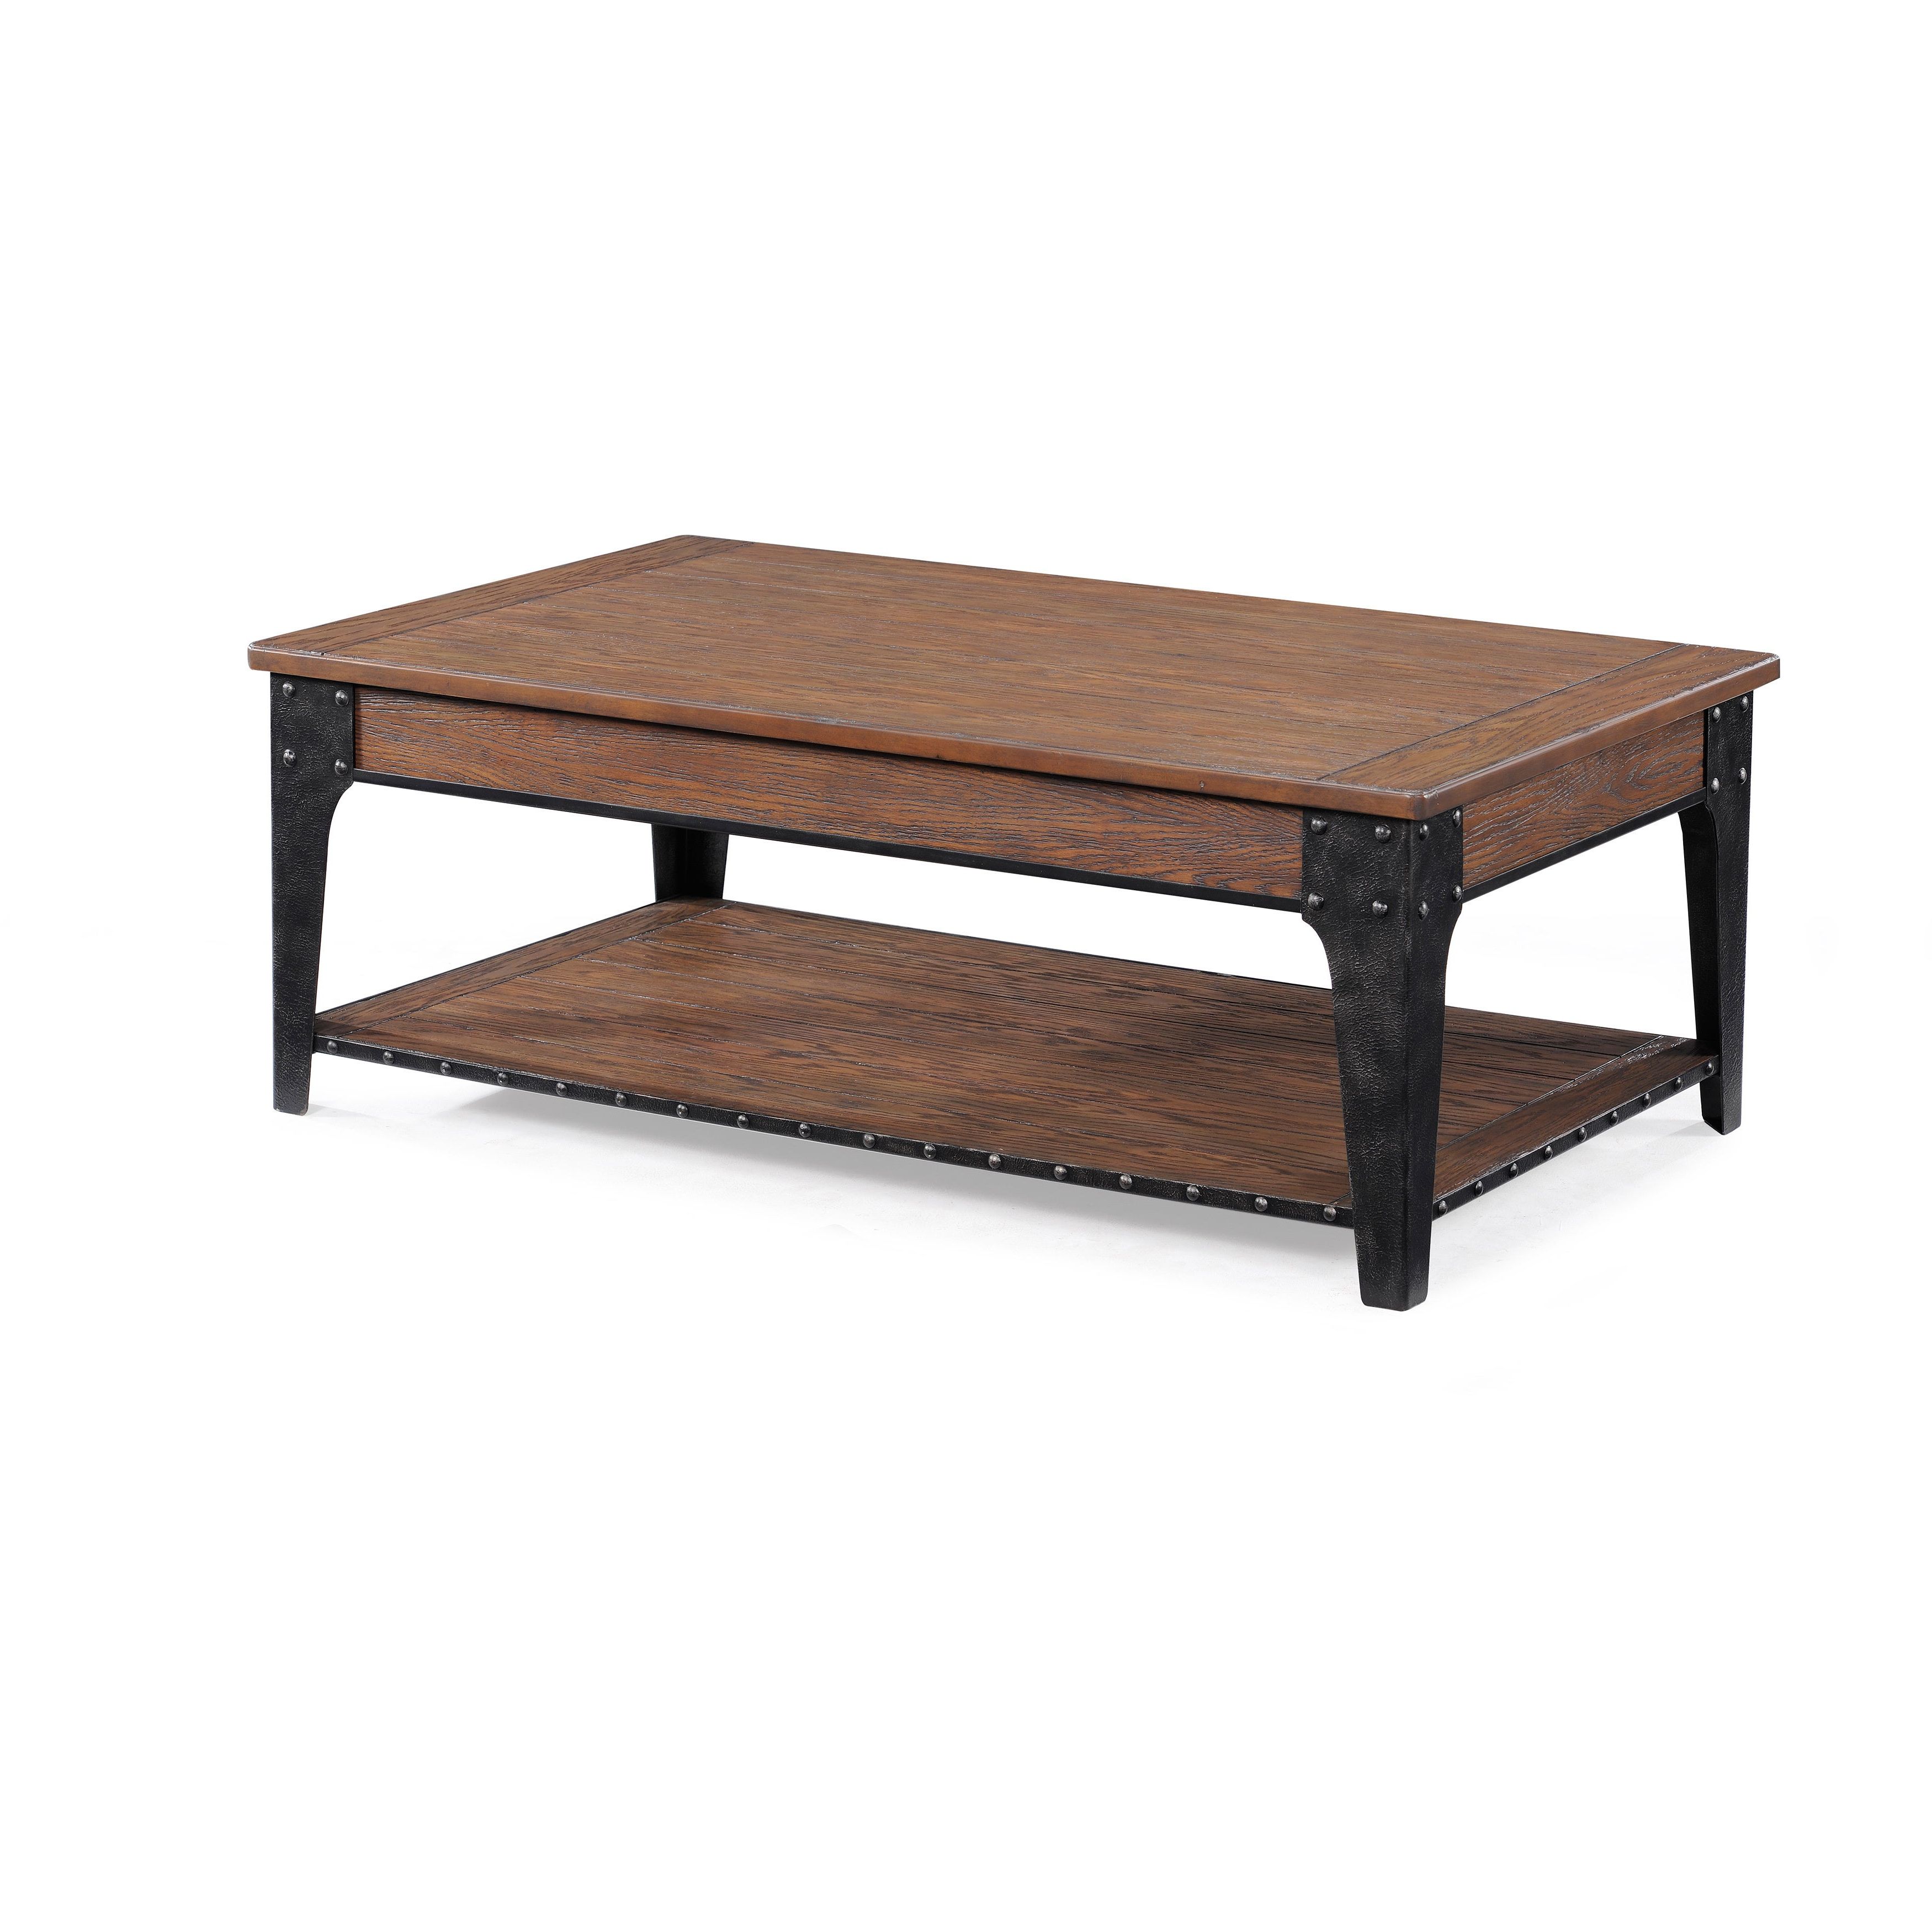 2020 Montgomery Industrial Reclaimed Wood Coffee Tables With Casters With Regard To Lakehurst Rustic Natural Ash Lift Top Coffee Table With Casters (View 10 of 20)